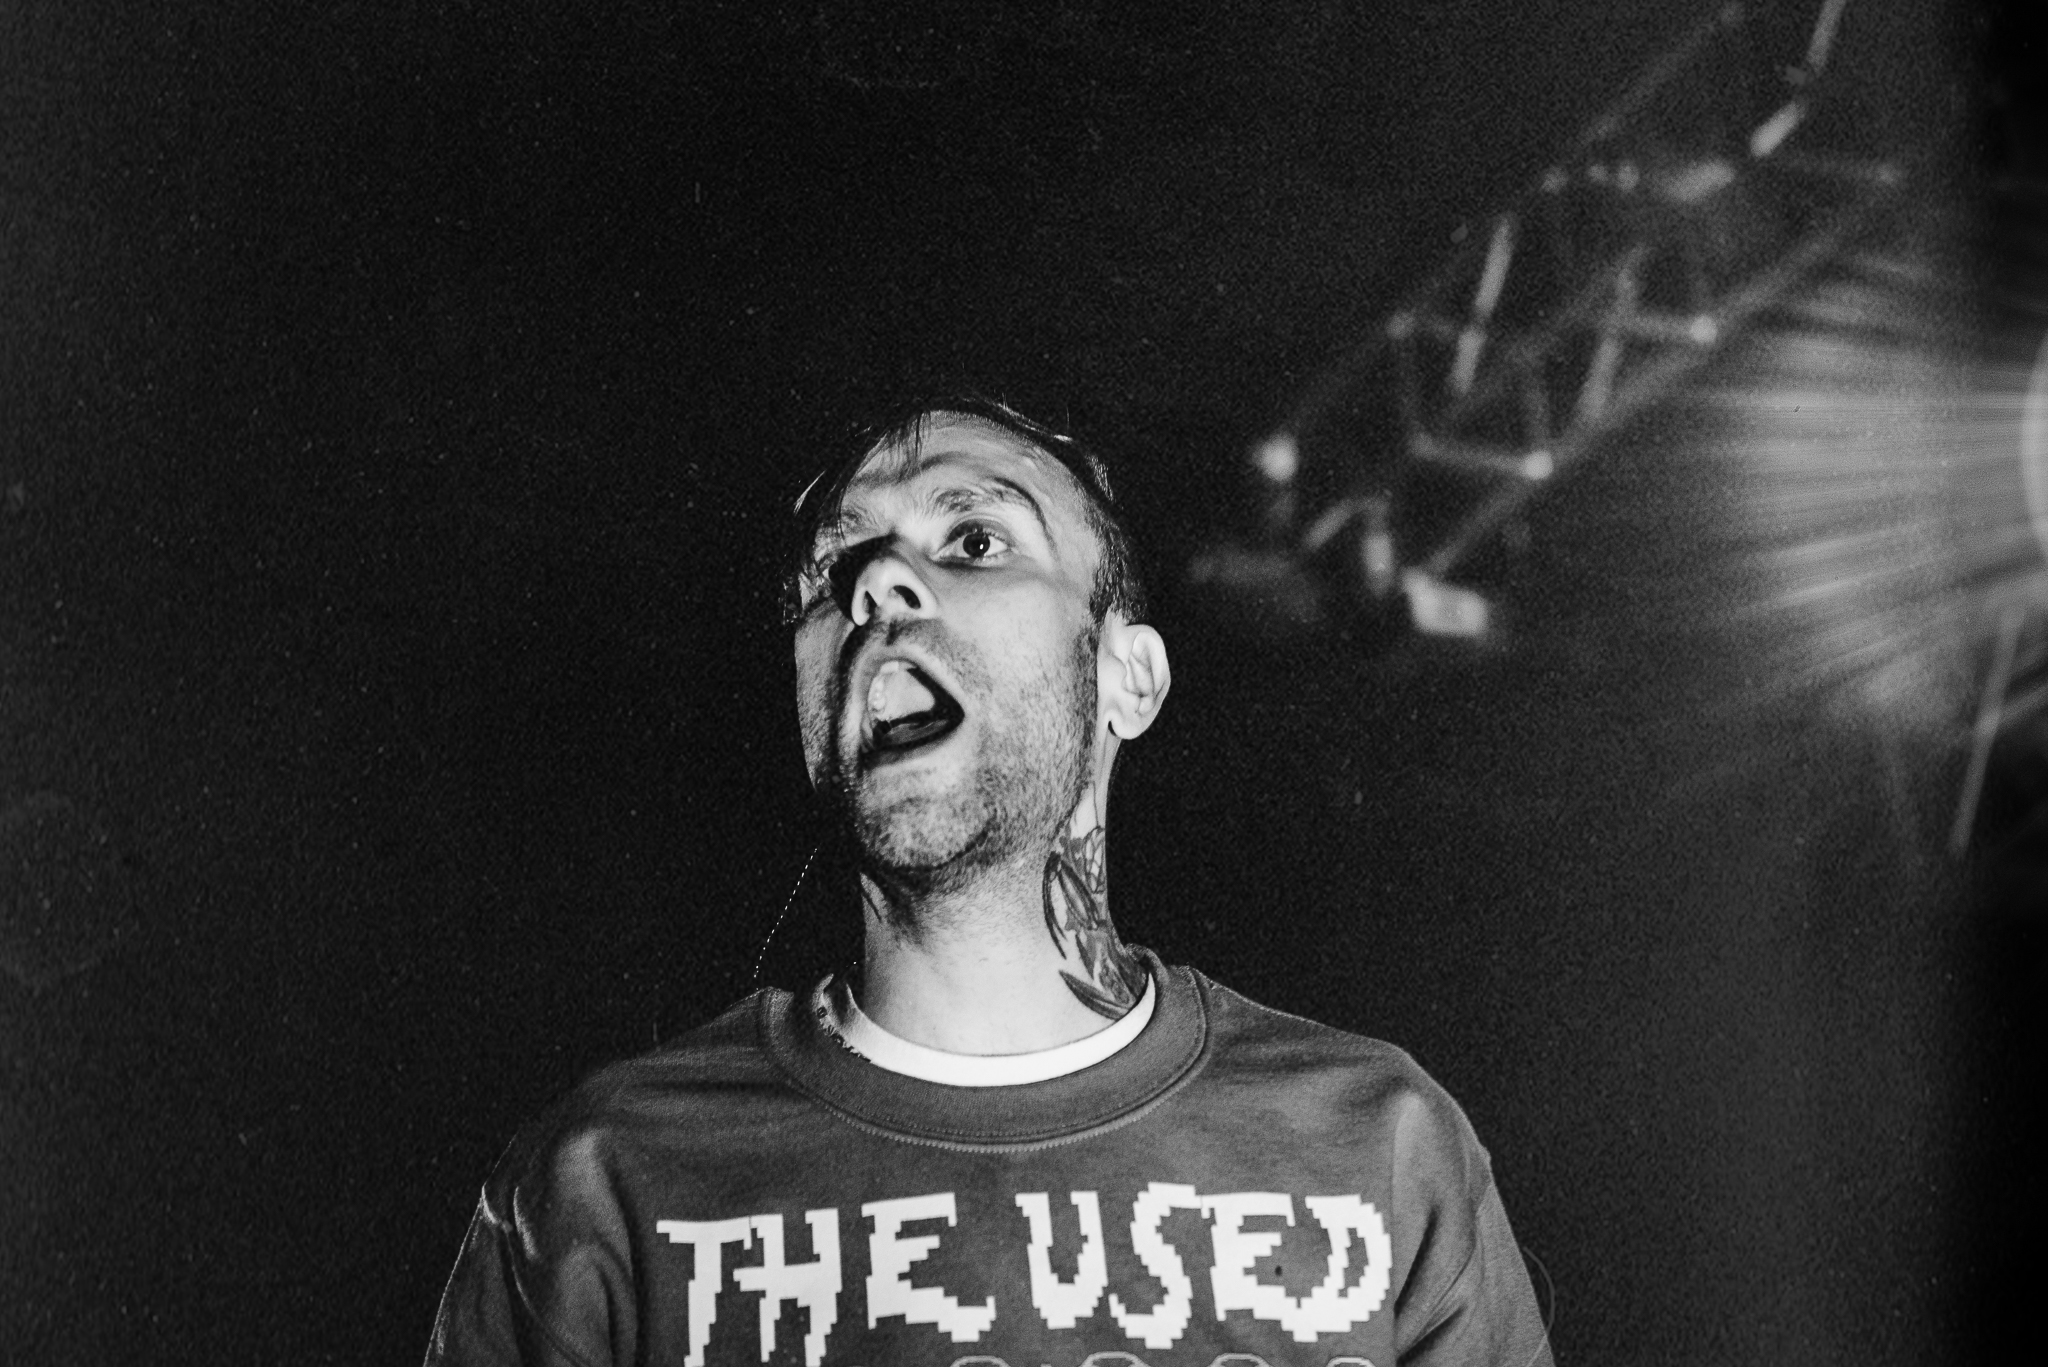 The Used Starland Ballroom Stars and Scars Photo